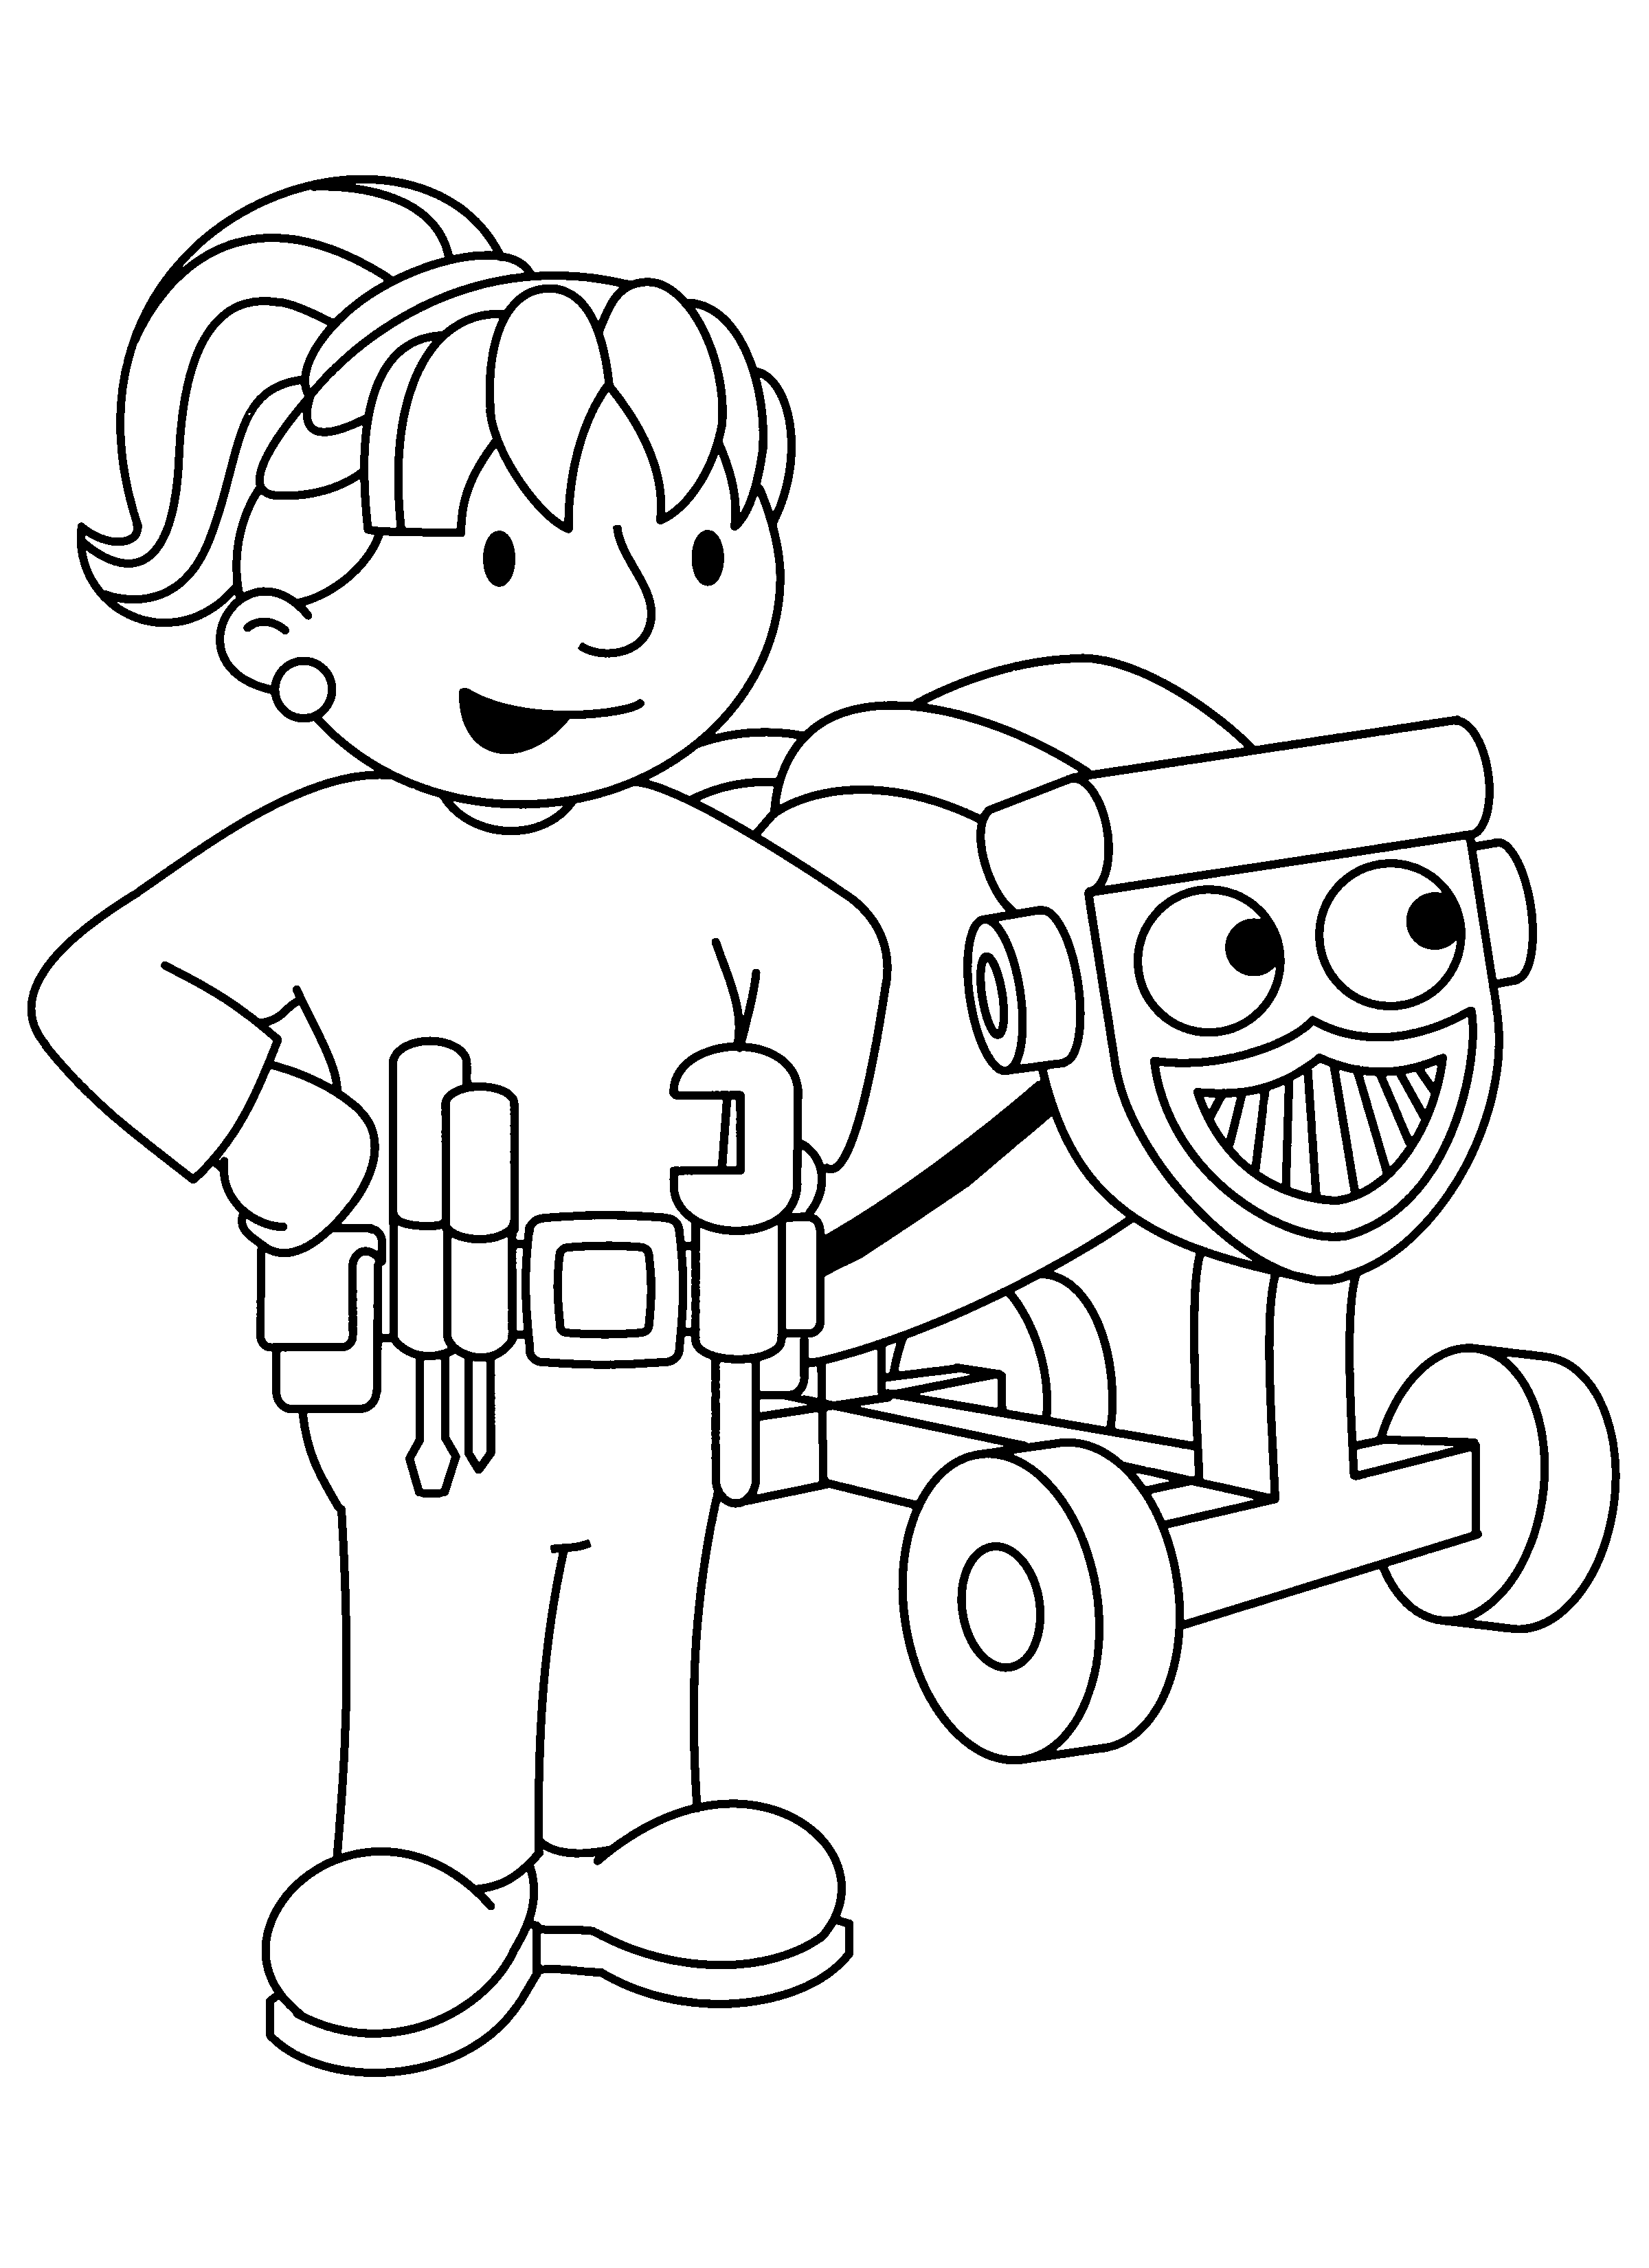 Bob The Builder Colouring Pages Free 4 Coloring Pages - vrogue.co